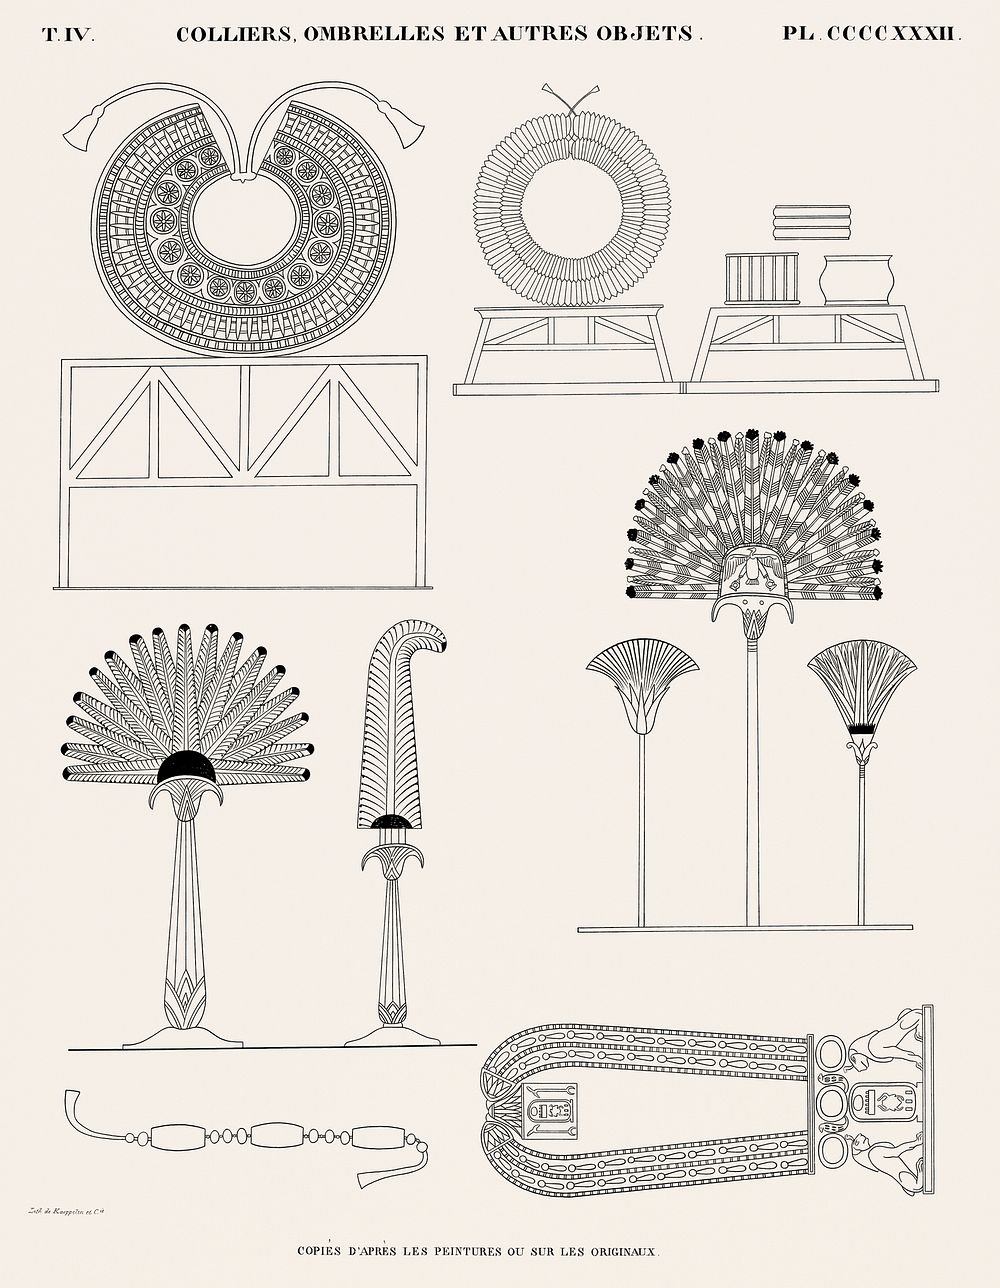 Vintage illustration of Necklaces, umbrellas and other objects